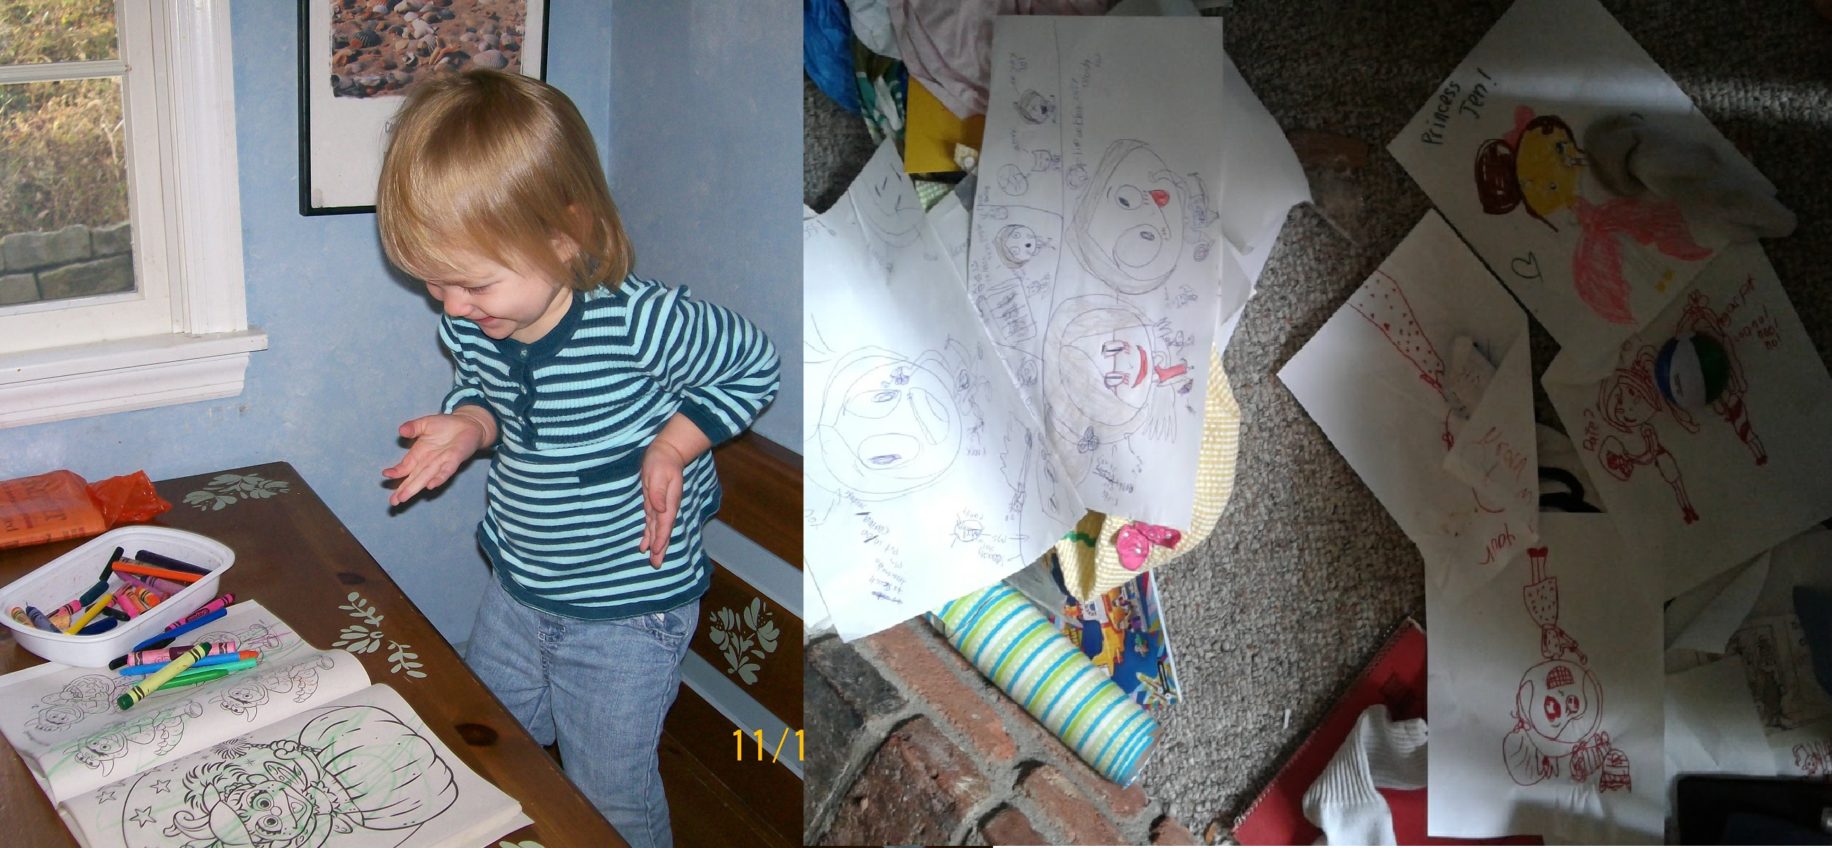 the author's daughter colors as a toddler and leaves a pile of drawings as an 8yo